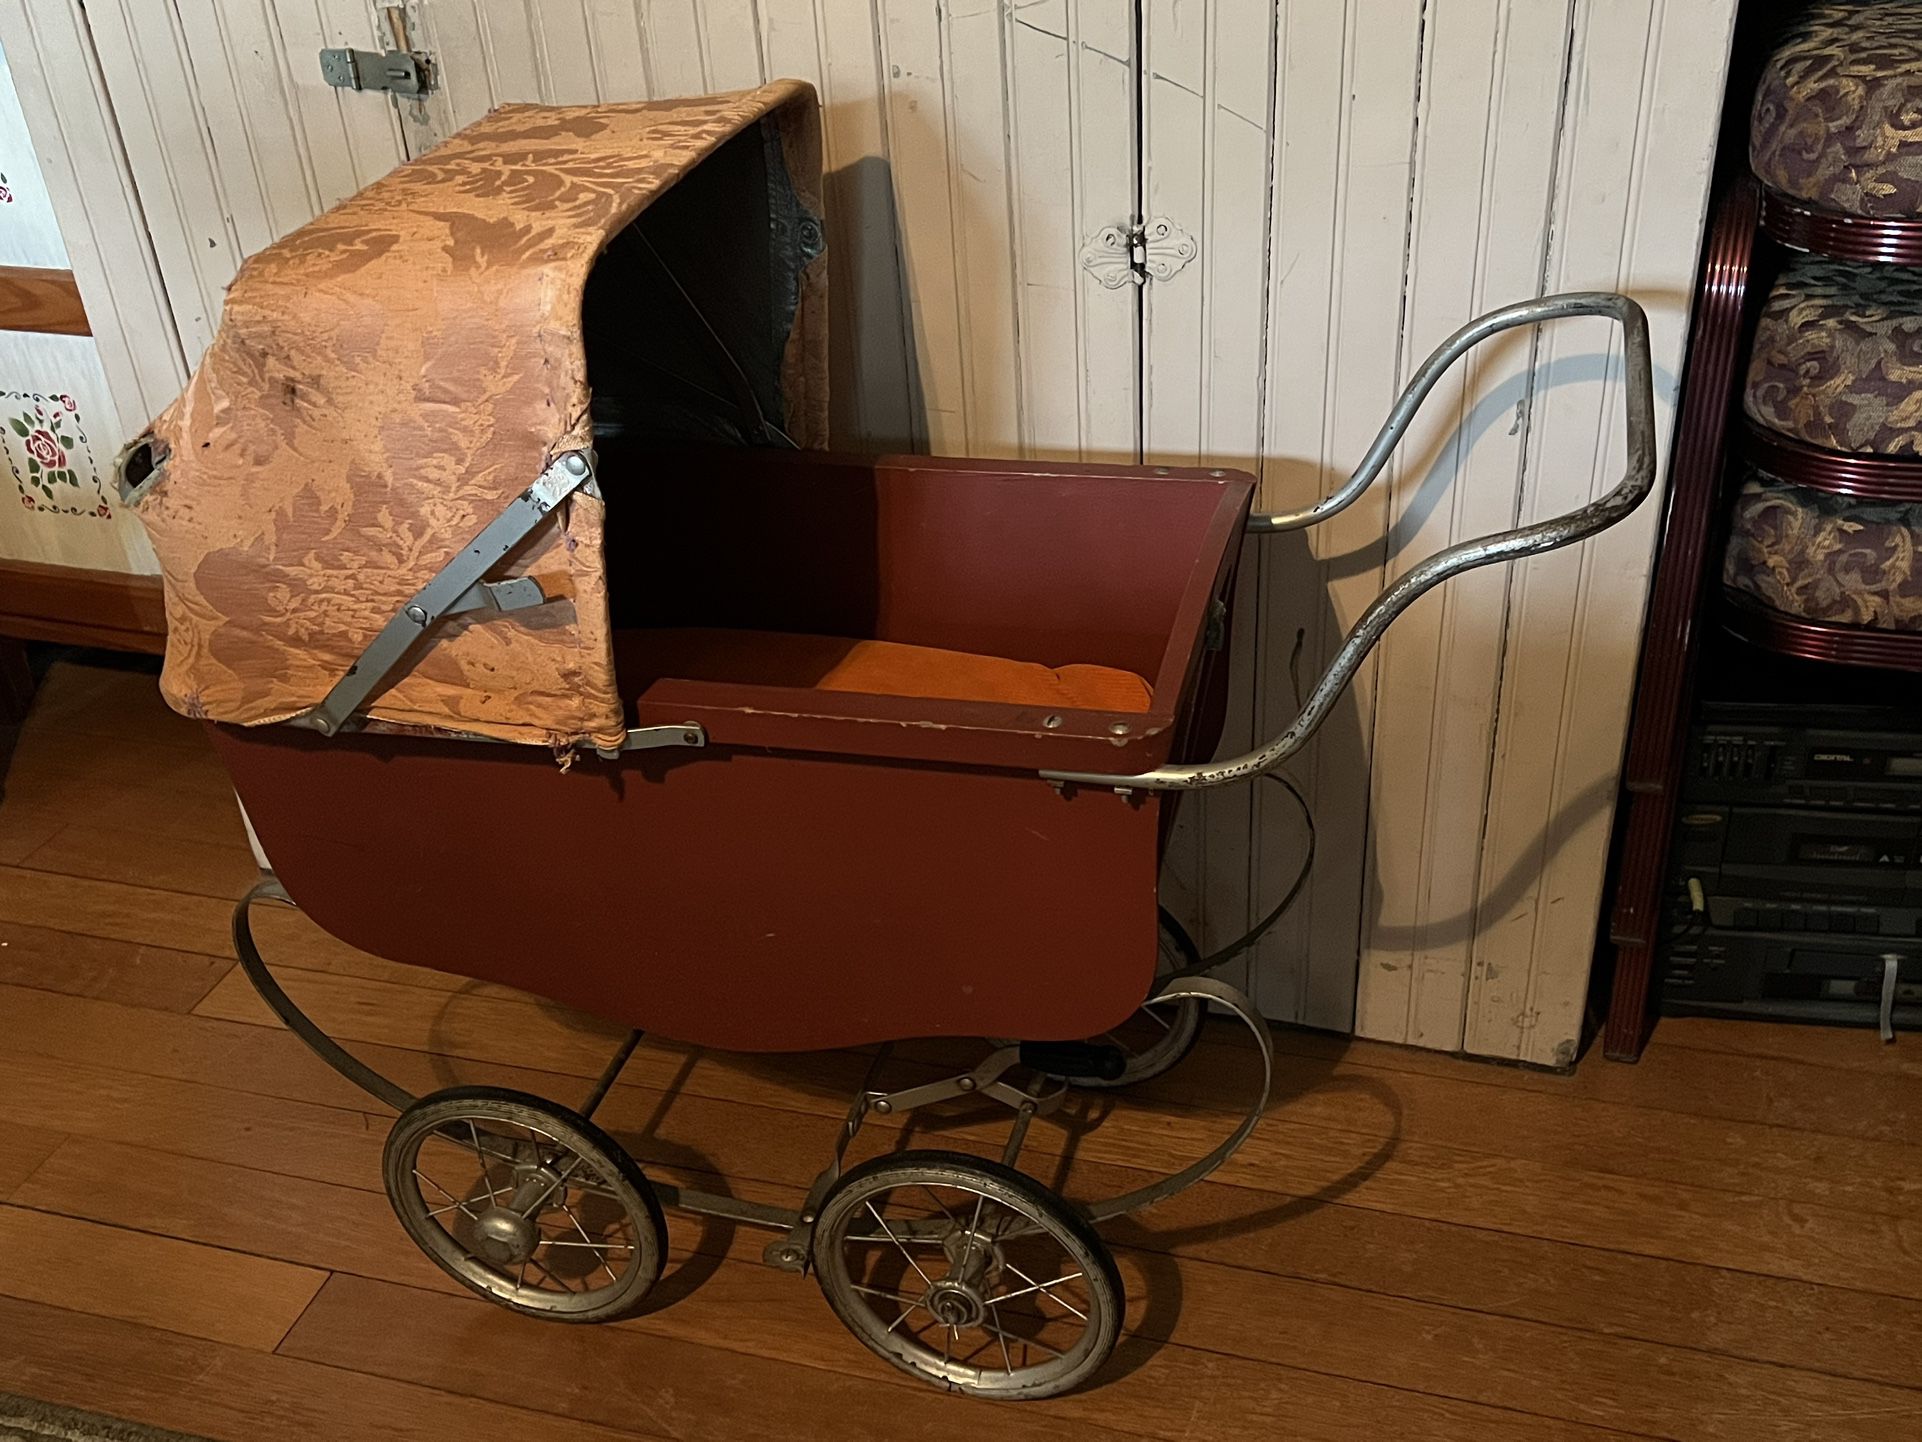 Vintage Baby Doll Buggy - Carriage